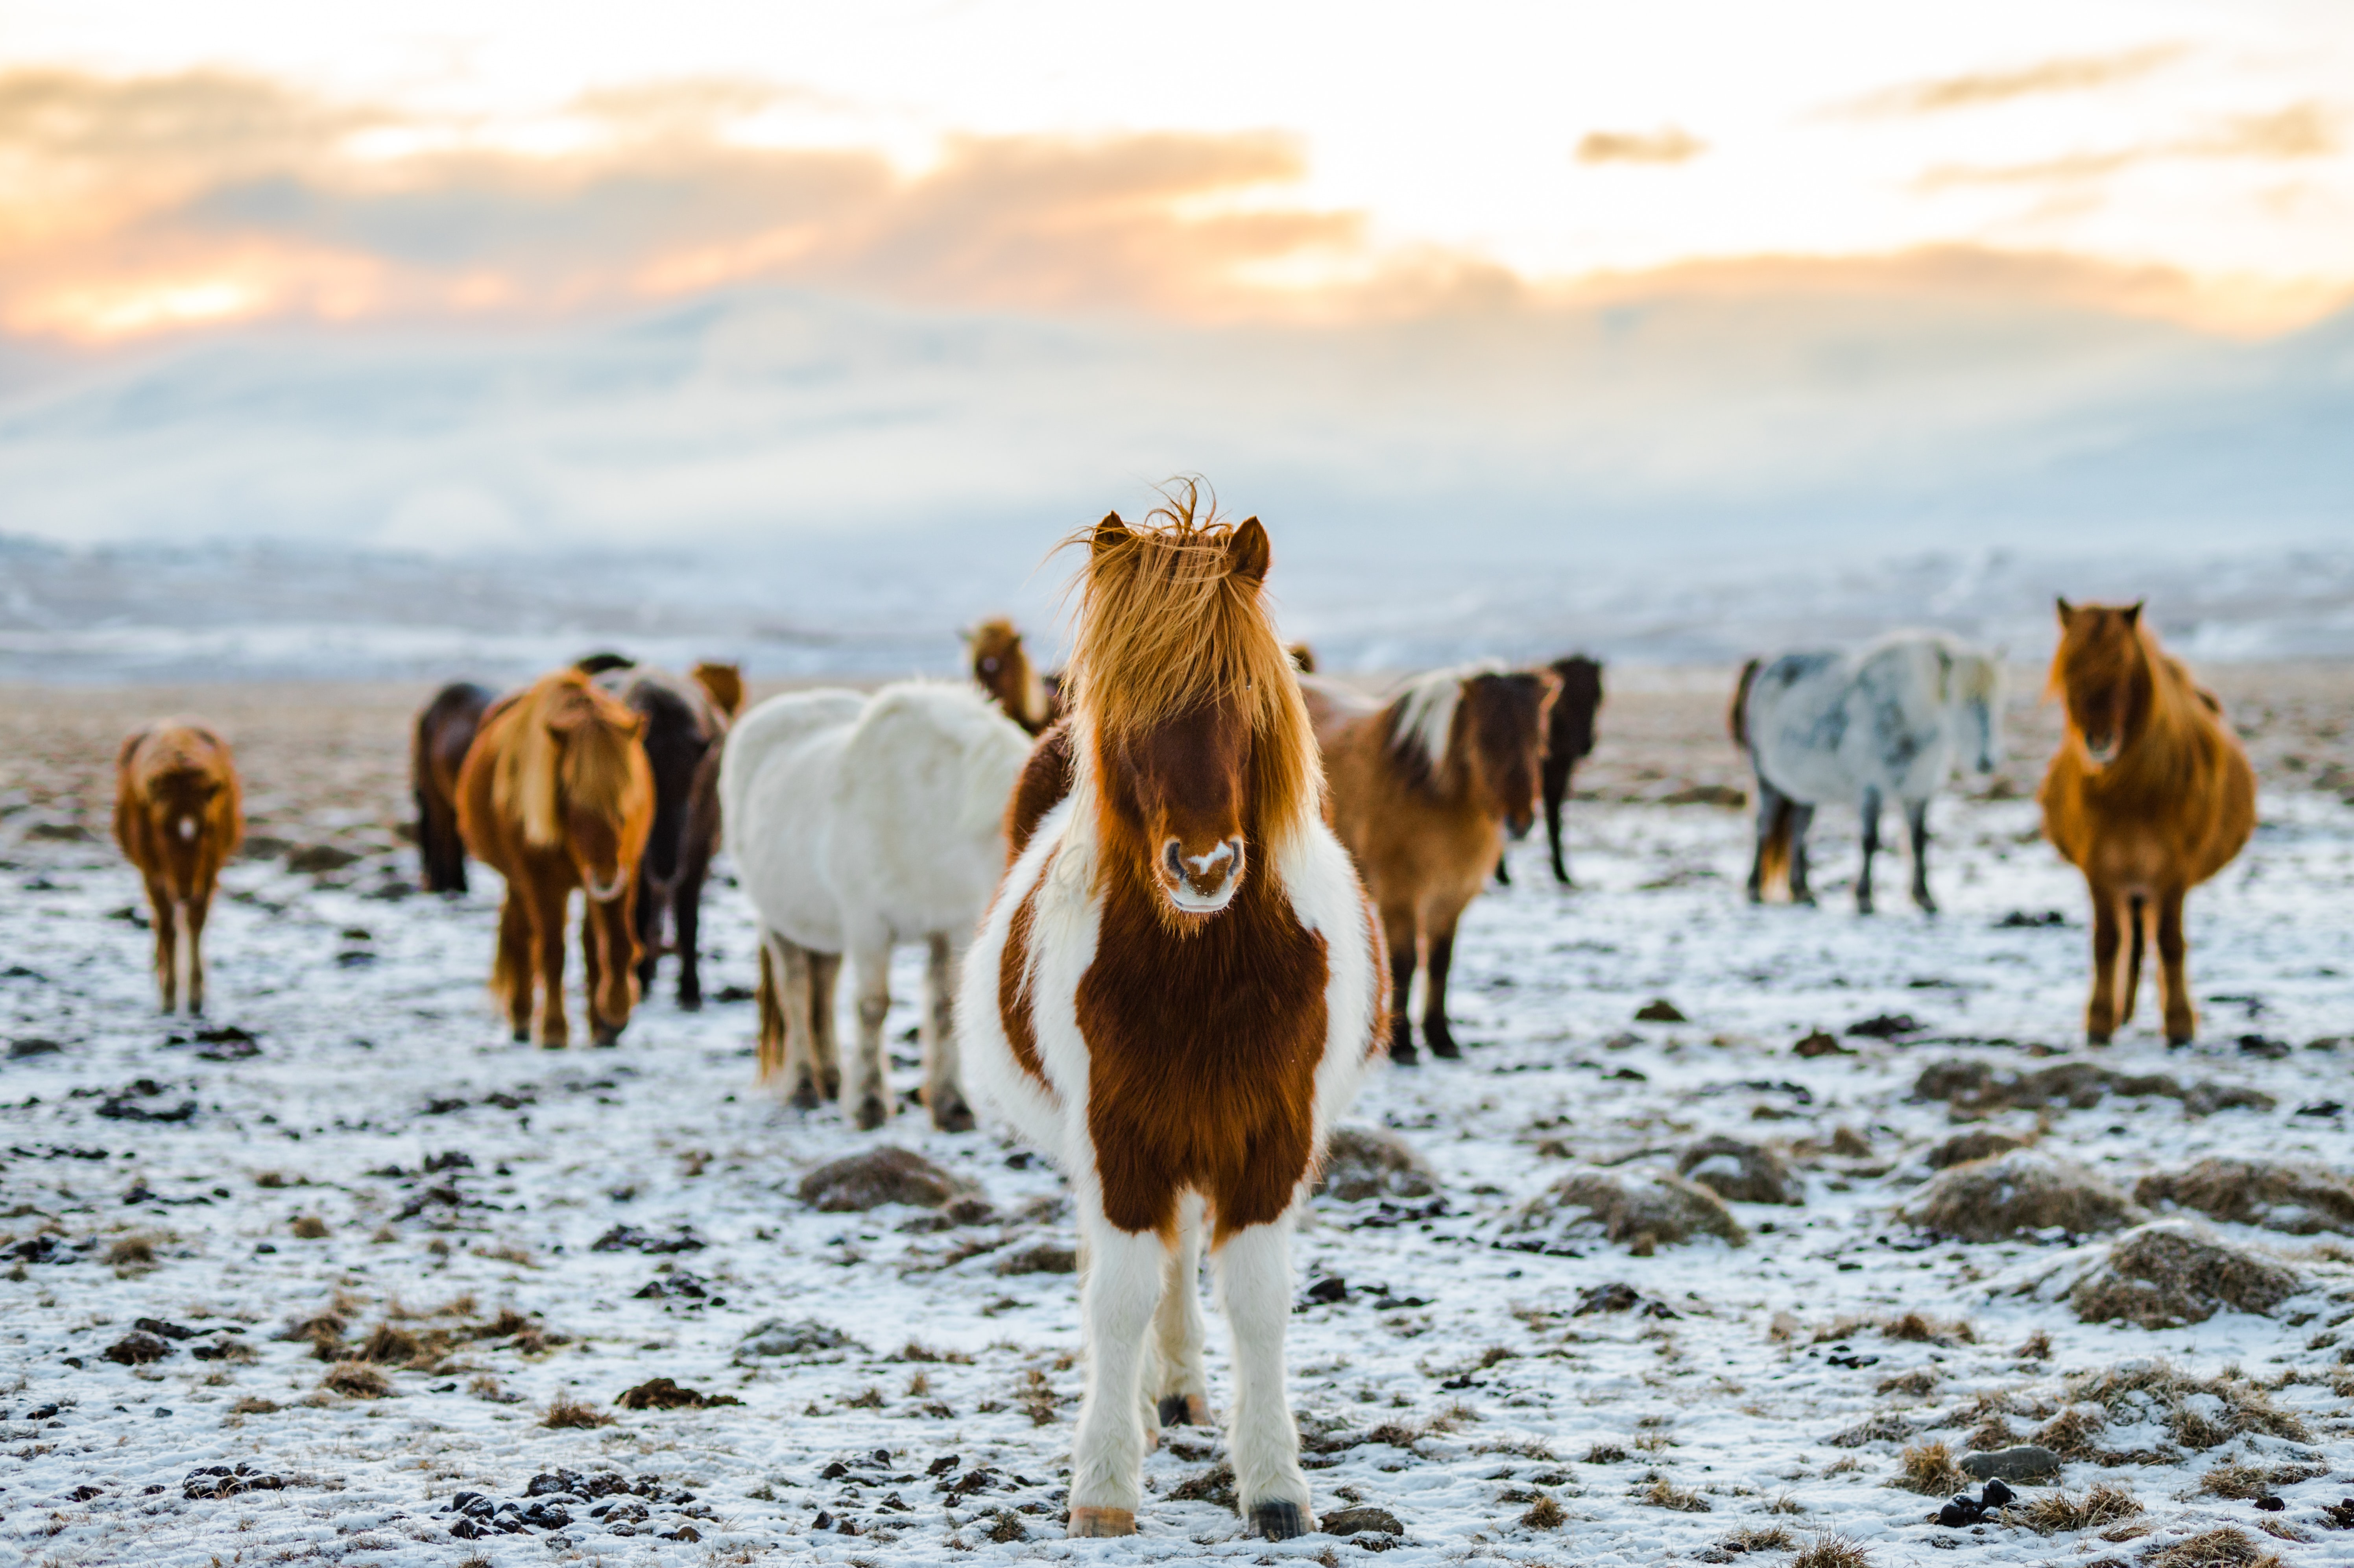 image of horses in Iceland